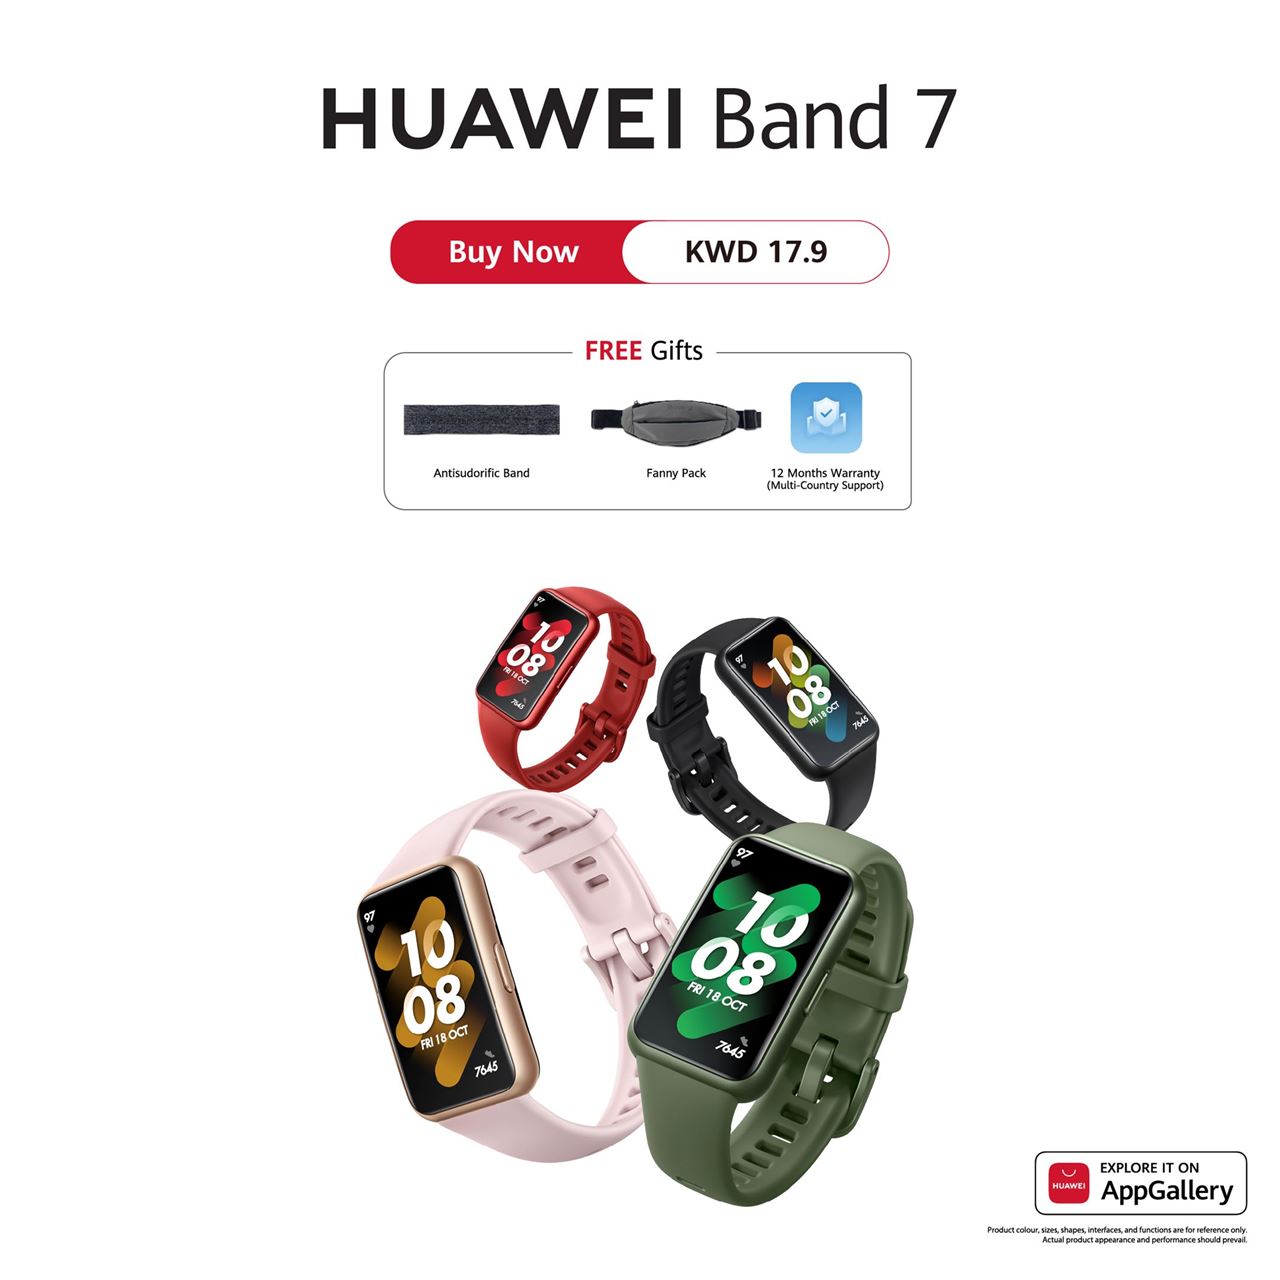 HUAWEI band 7: the Ultra-Thin FullView Smart Band with a Long Battery Life depicted tried and approved!